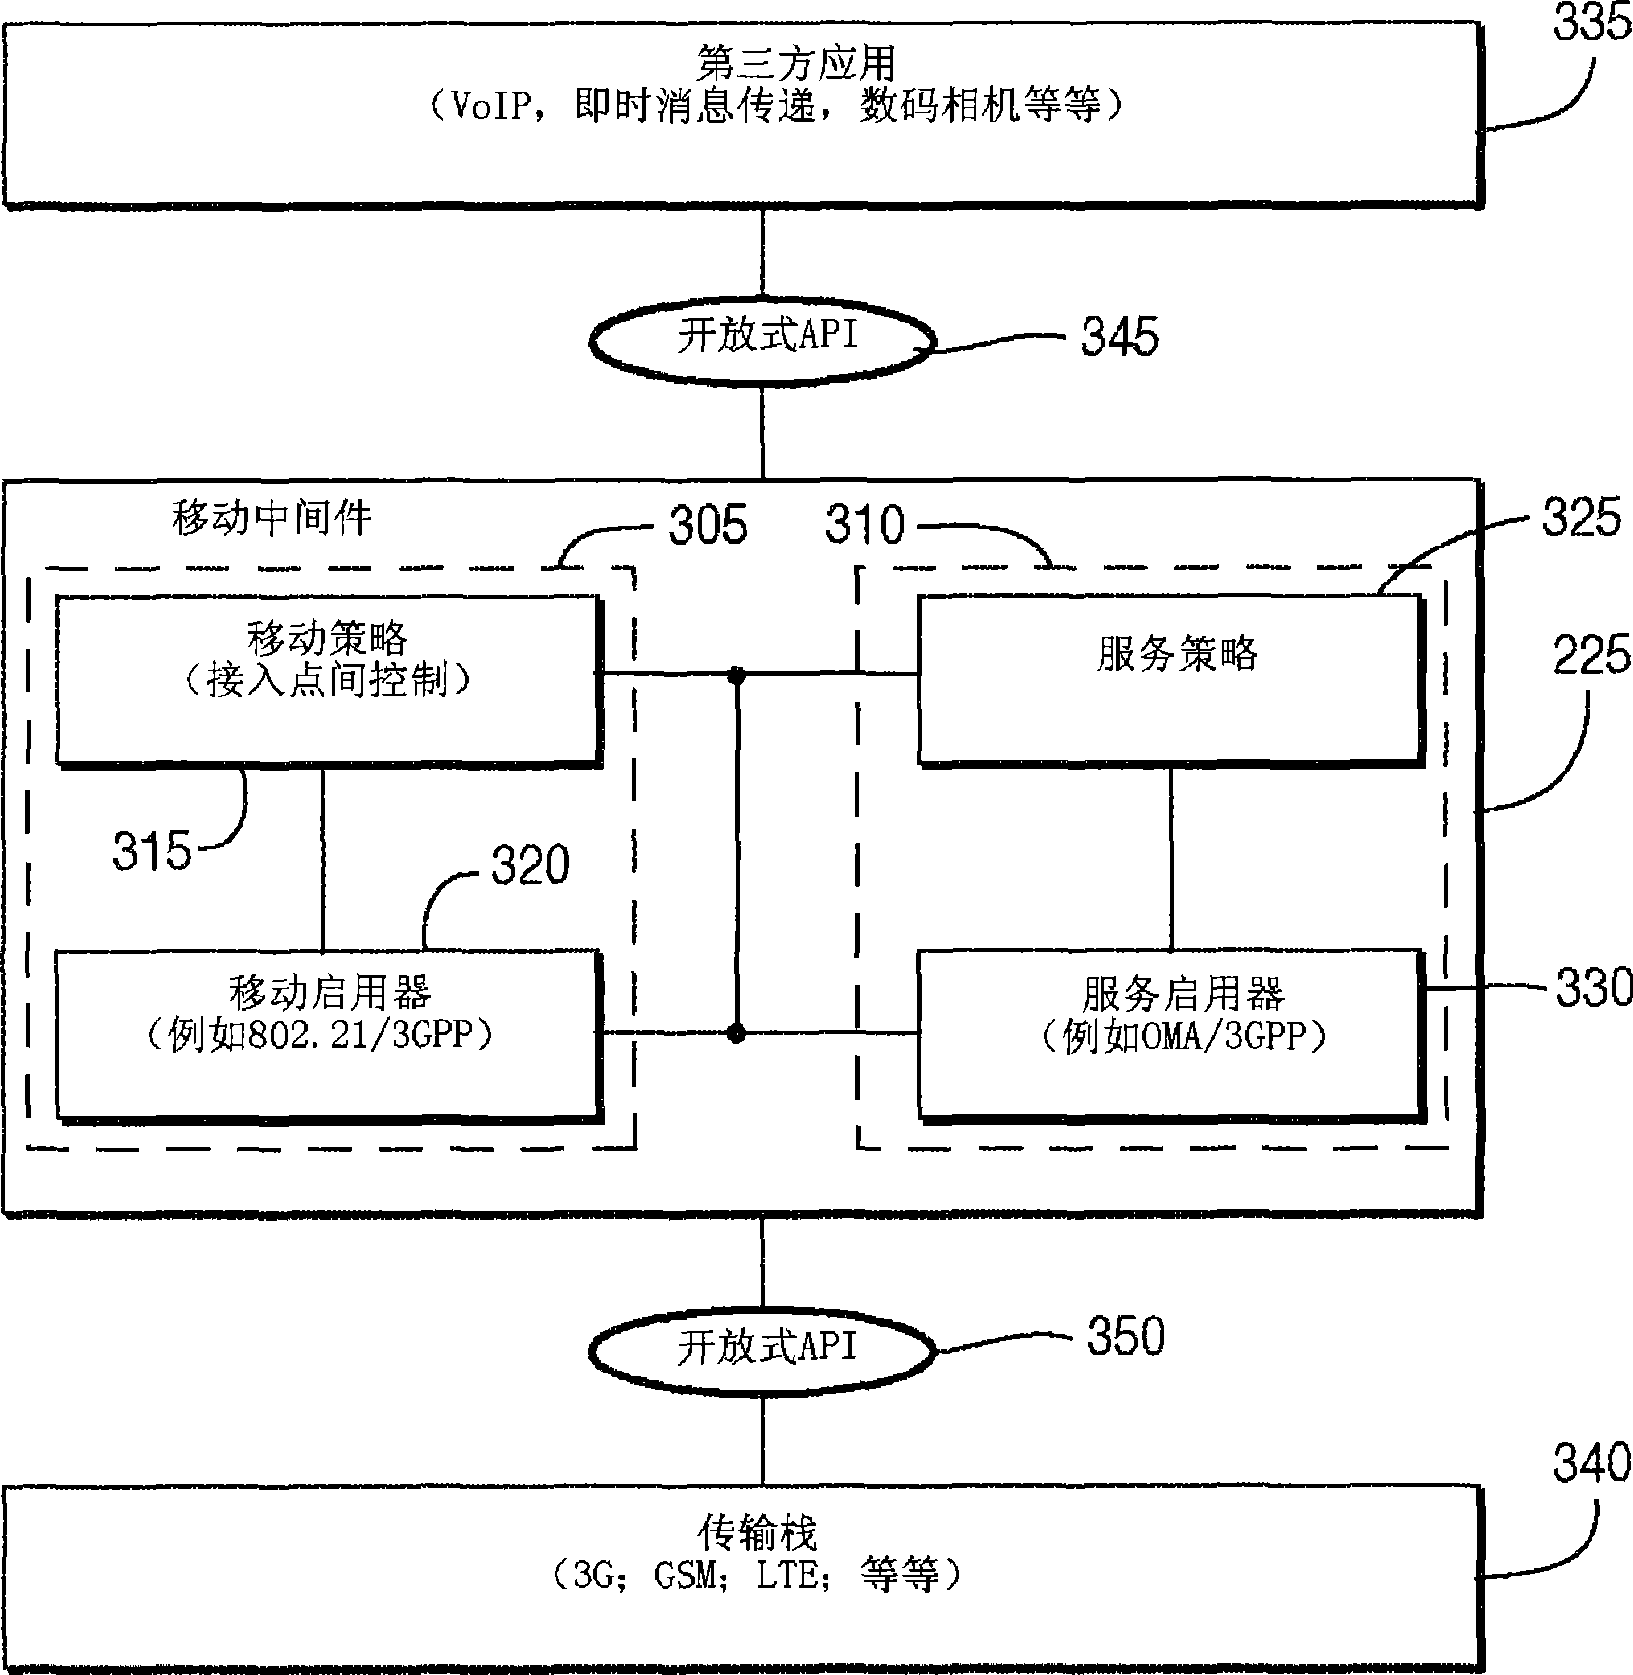 Mobility middleware architecture for multiple radio access technology apparatus